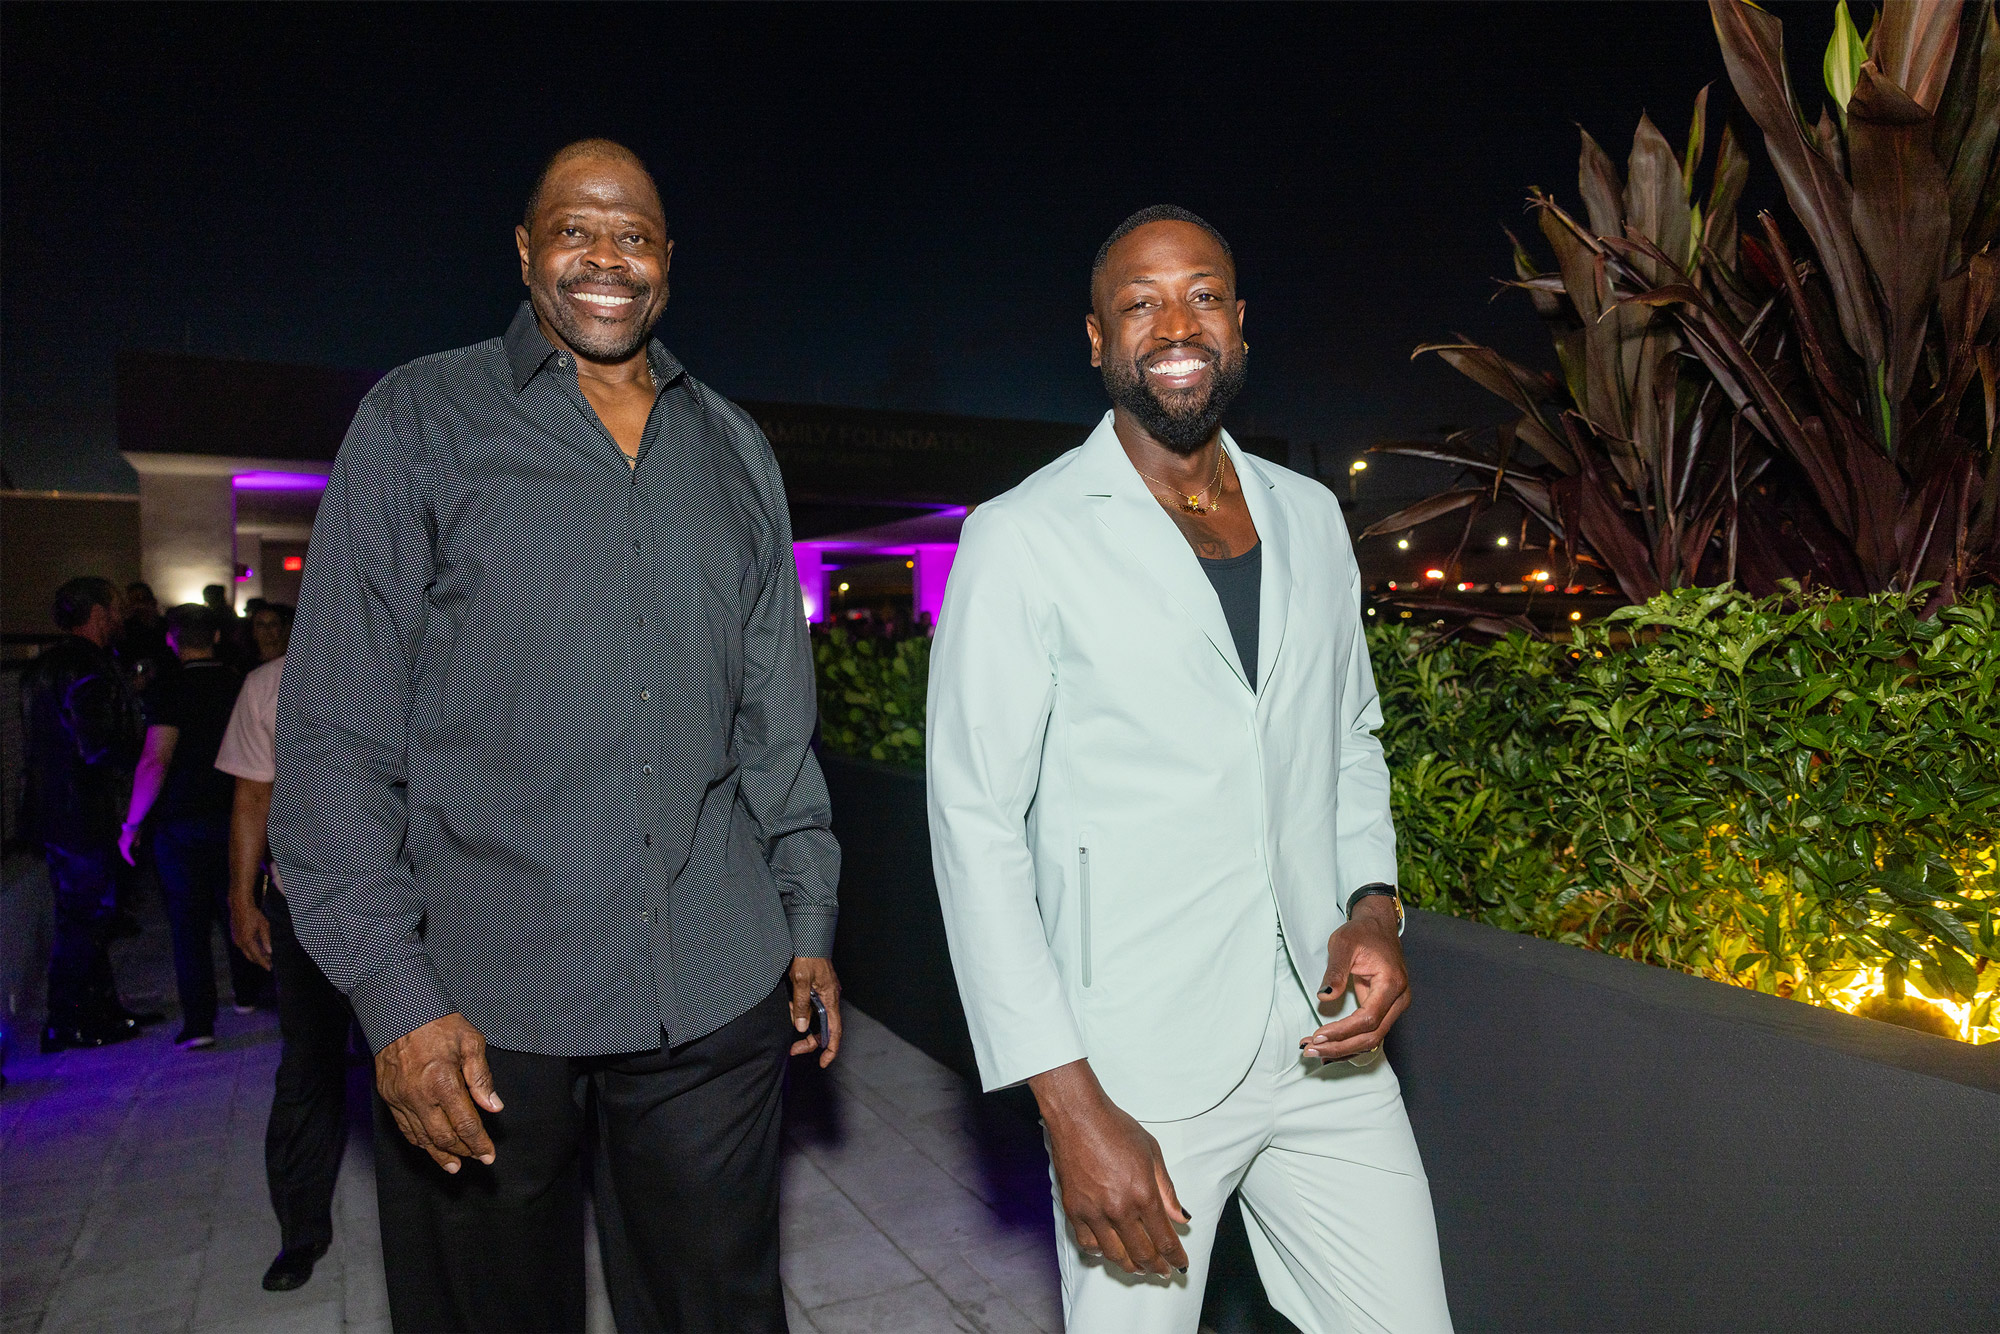 Patrick Ewing and Dwayne Wade outside the OYC miami building.